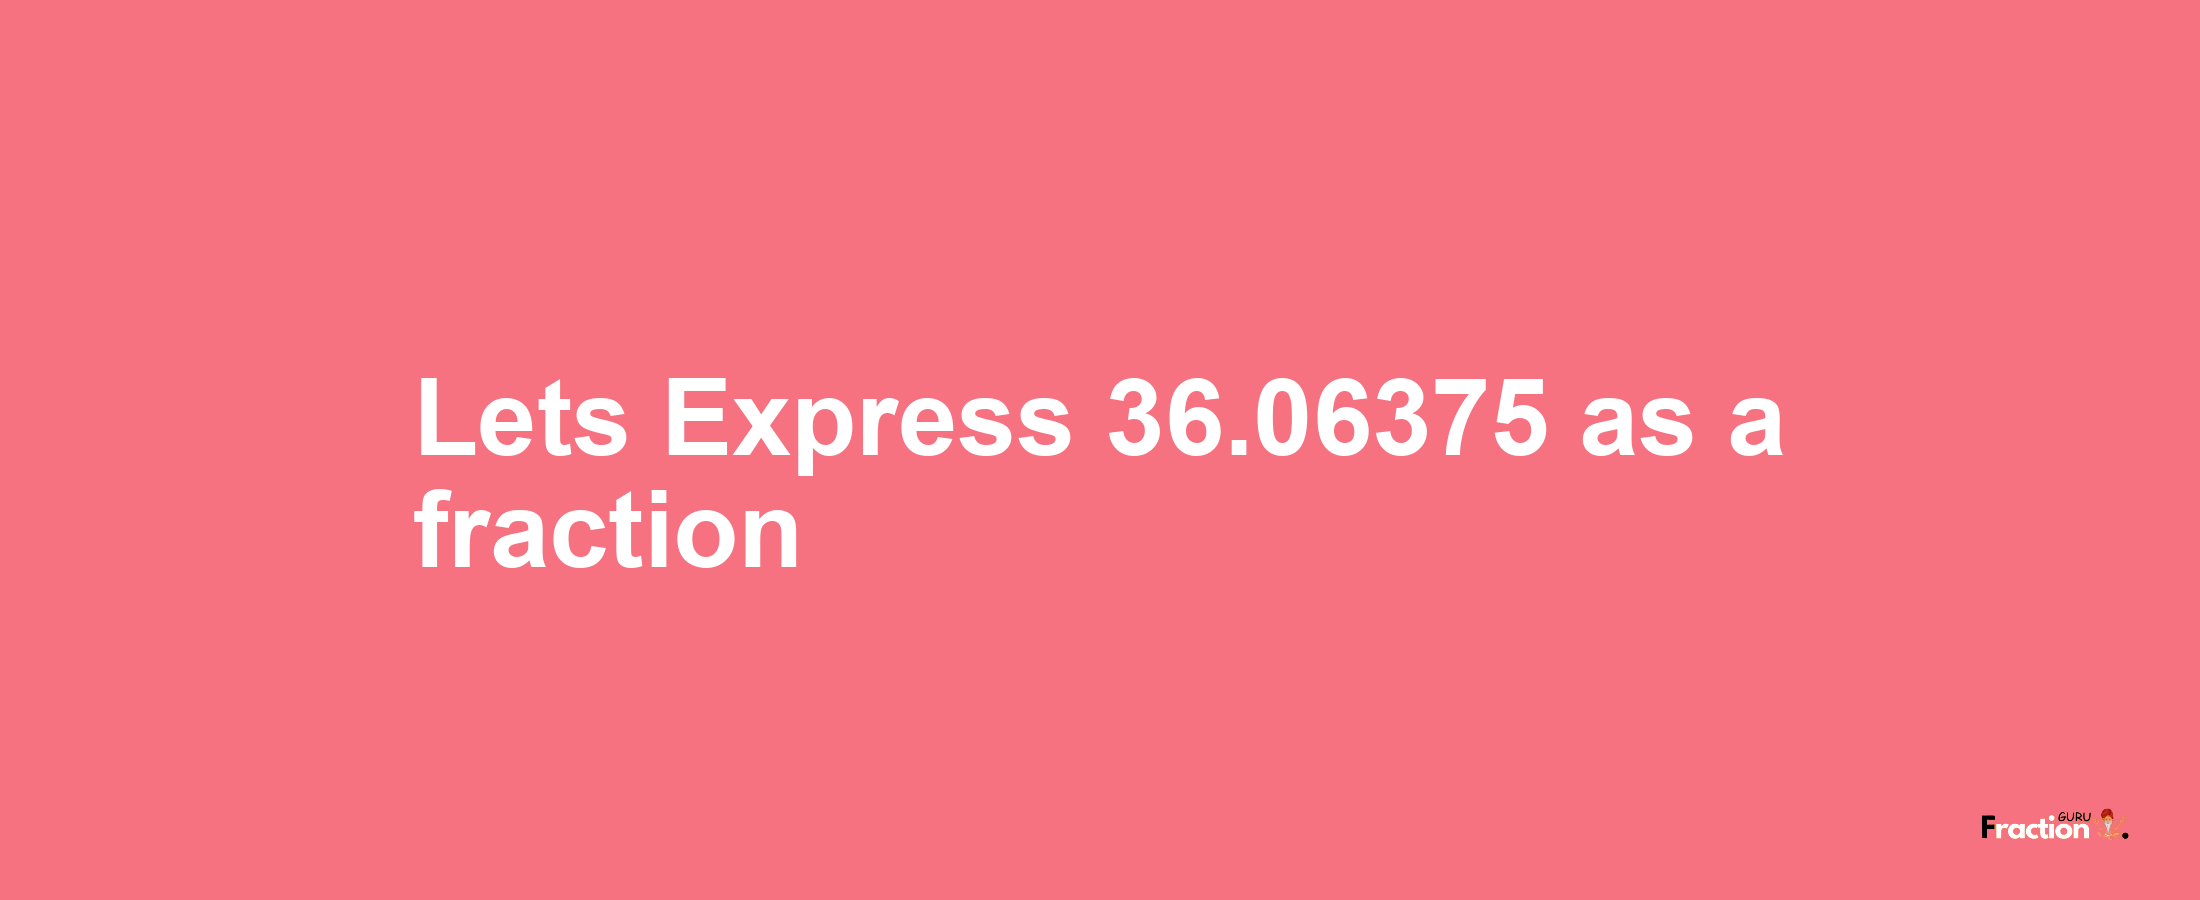 Lets Express 36.06375 as afraction